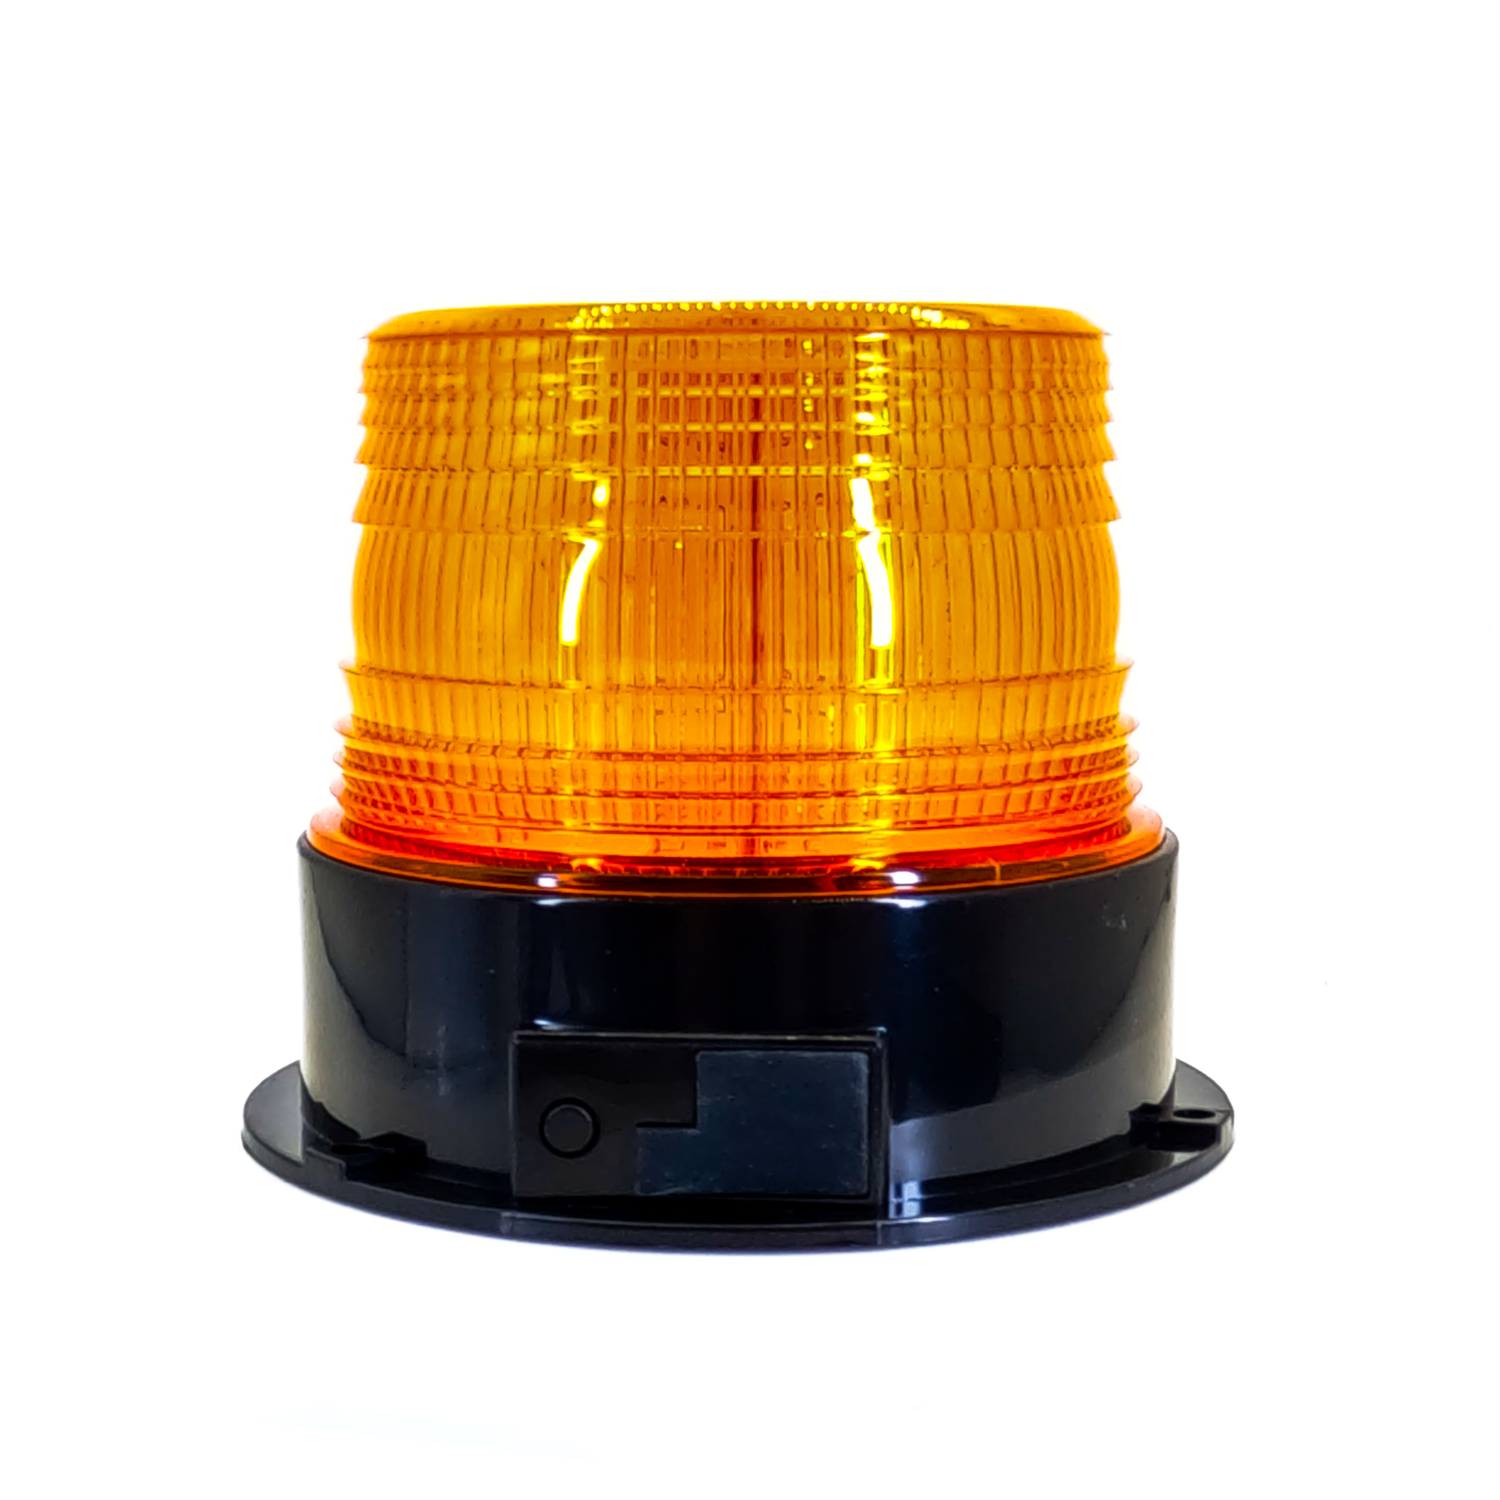 How To Choose The Best Beacon Strobe Lights For Your Vehicle?